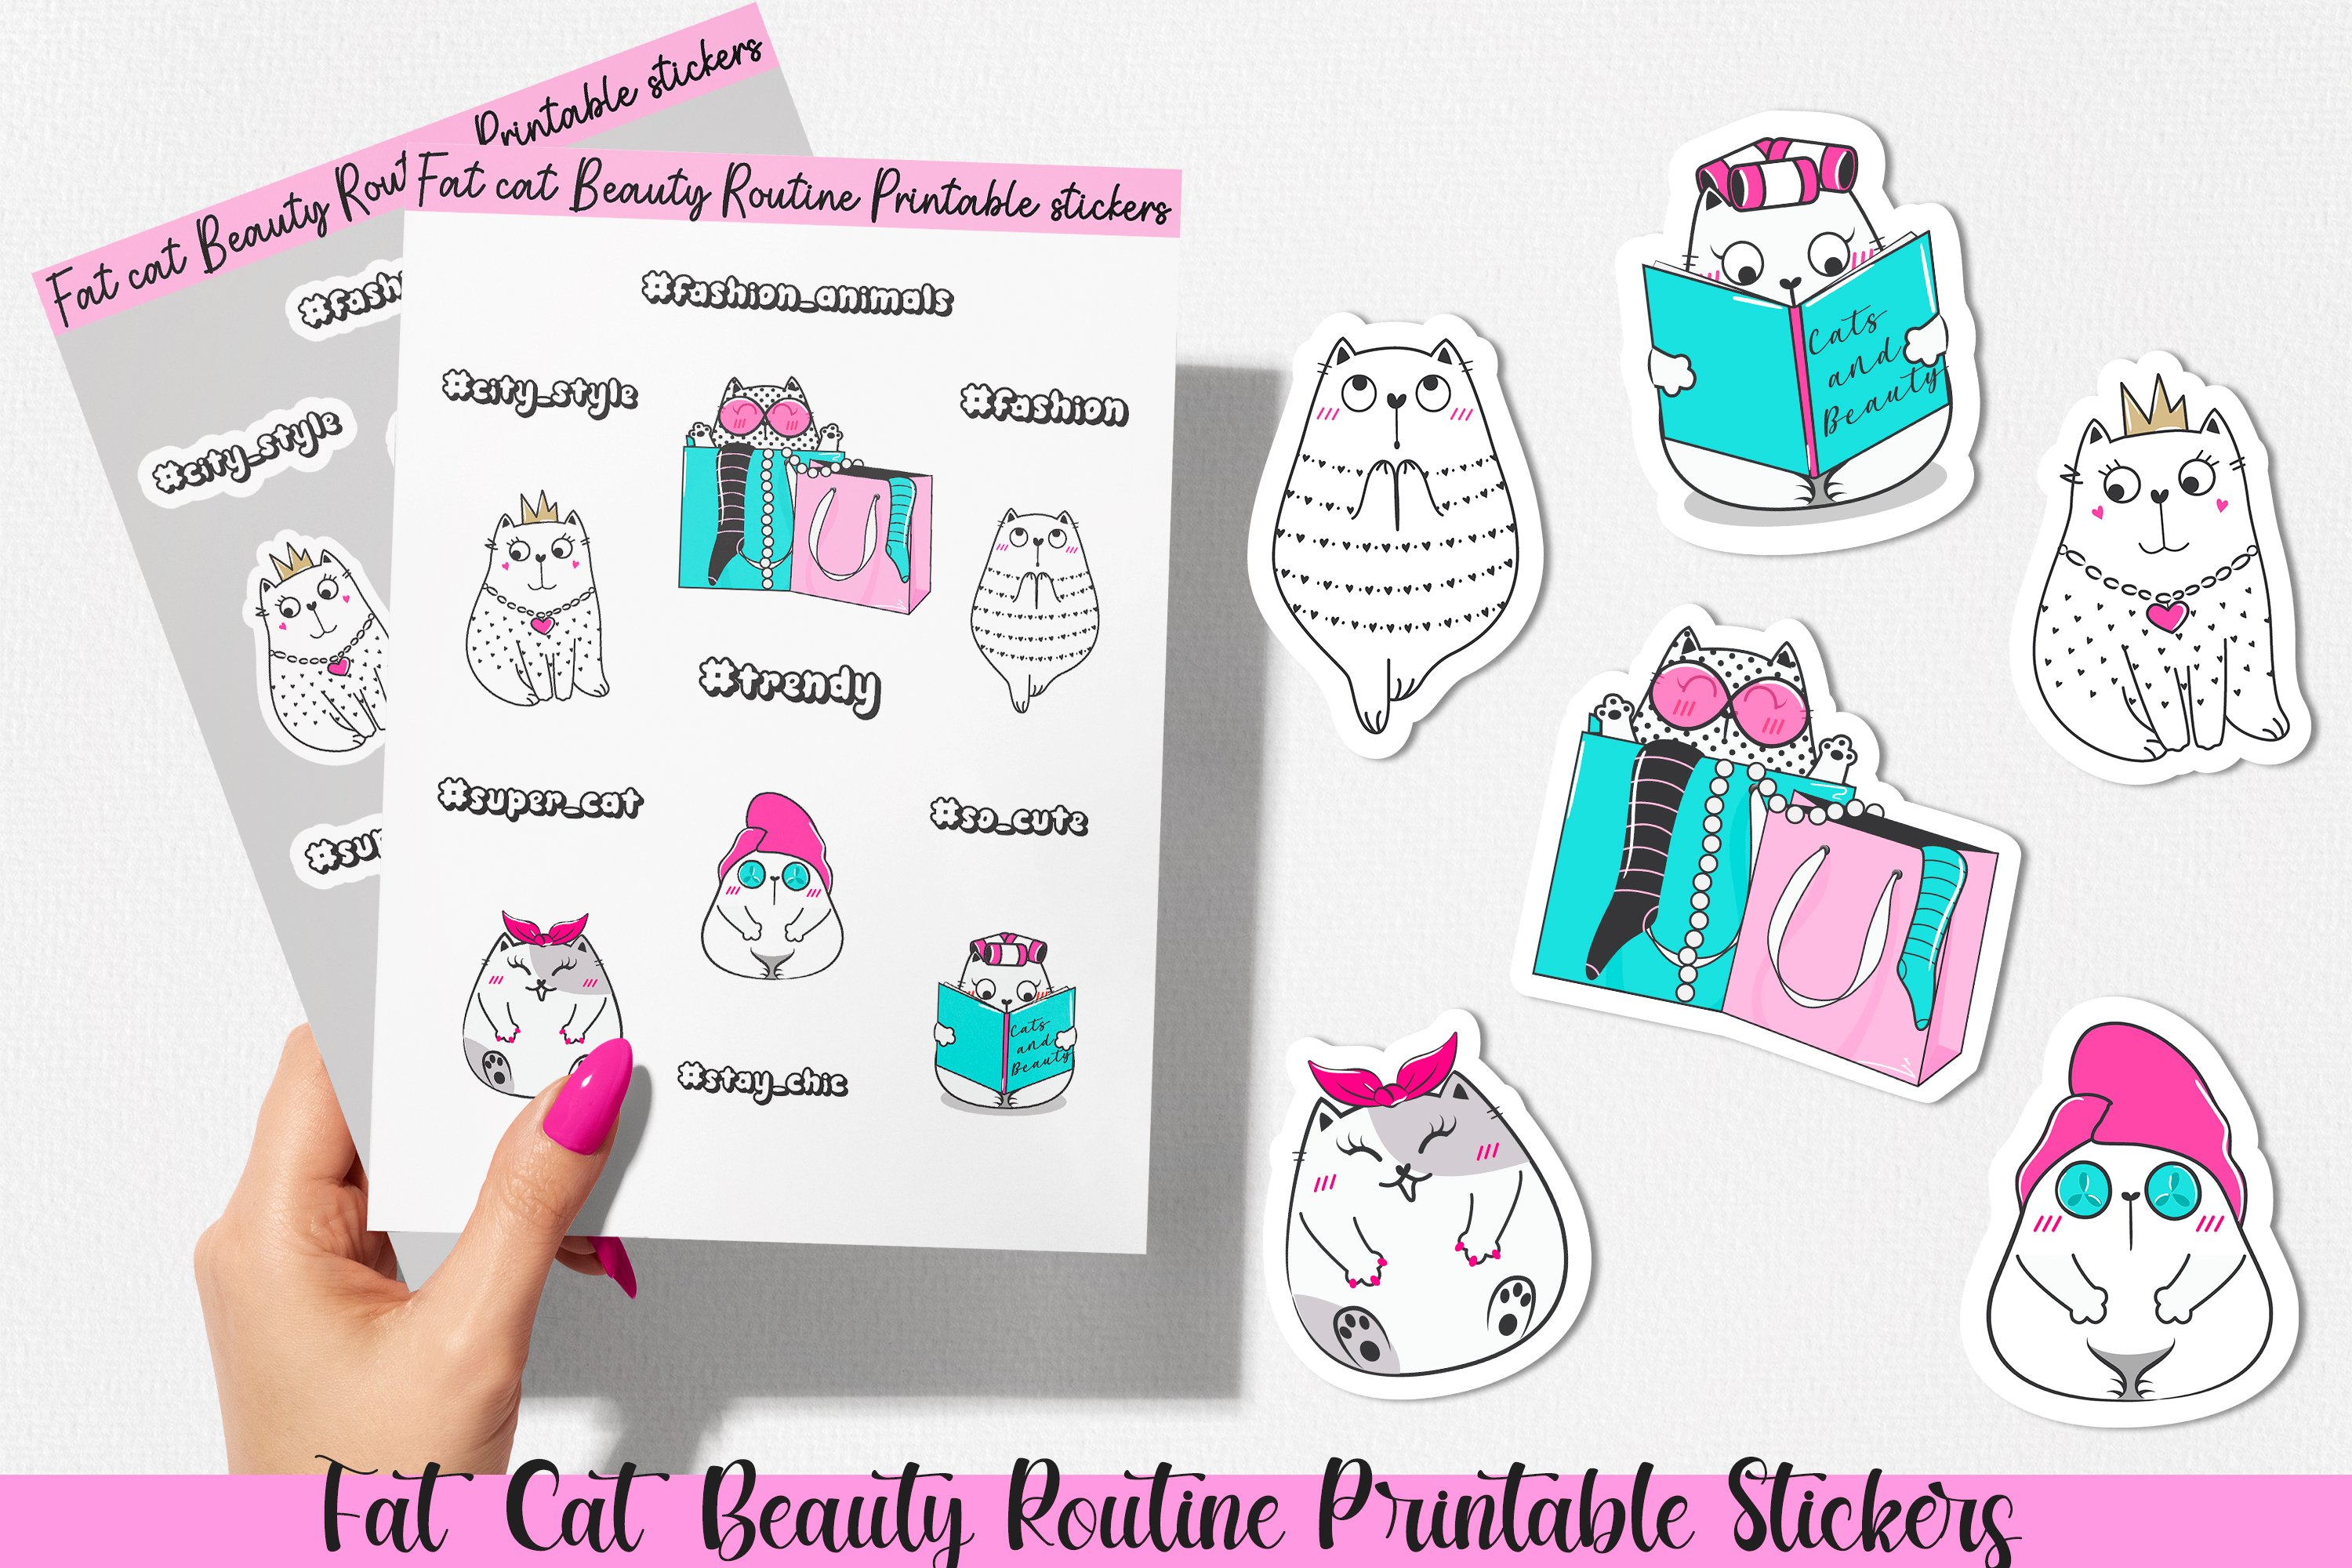 Images of fat cats on stickers.